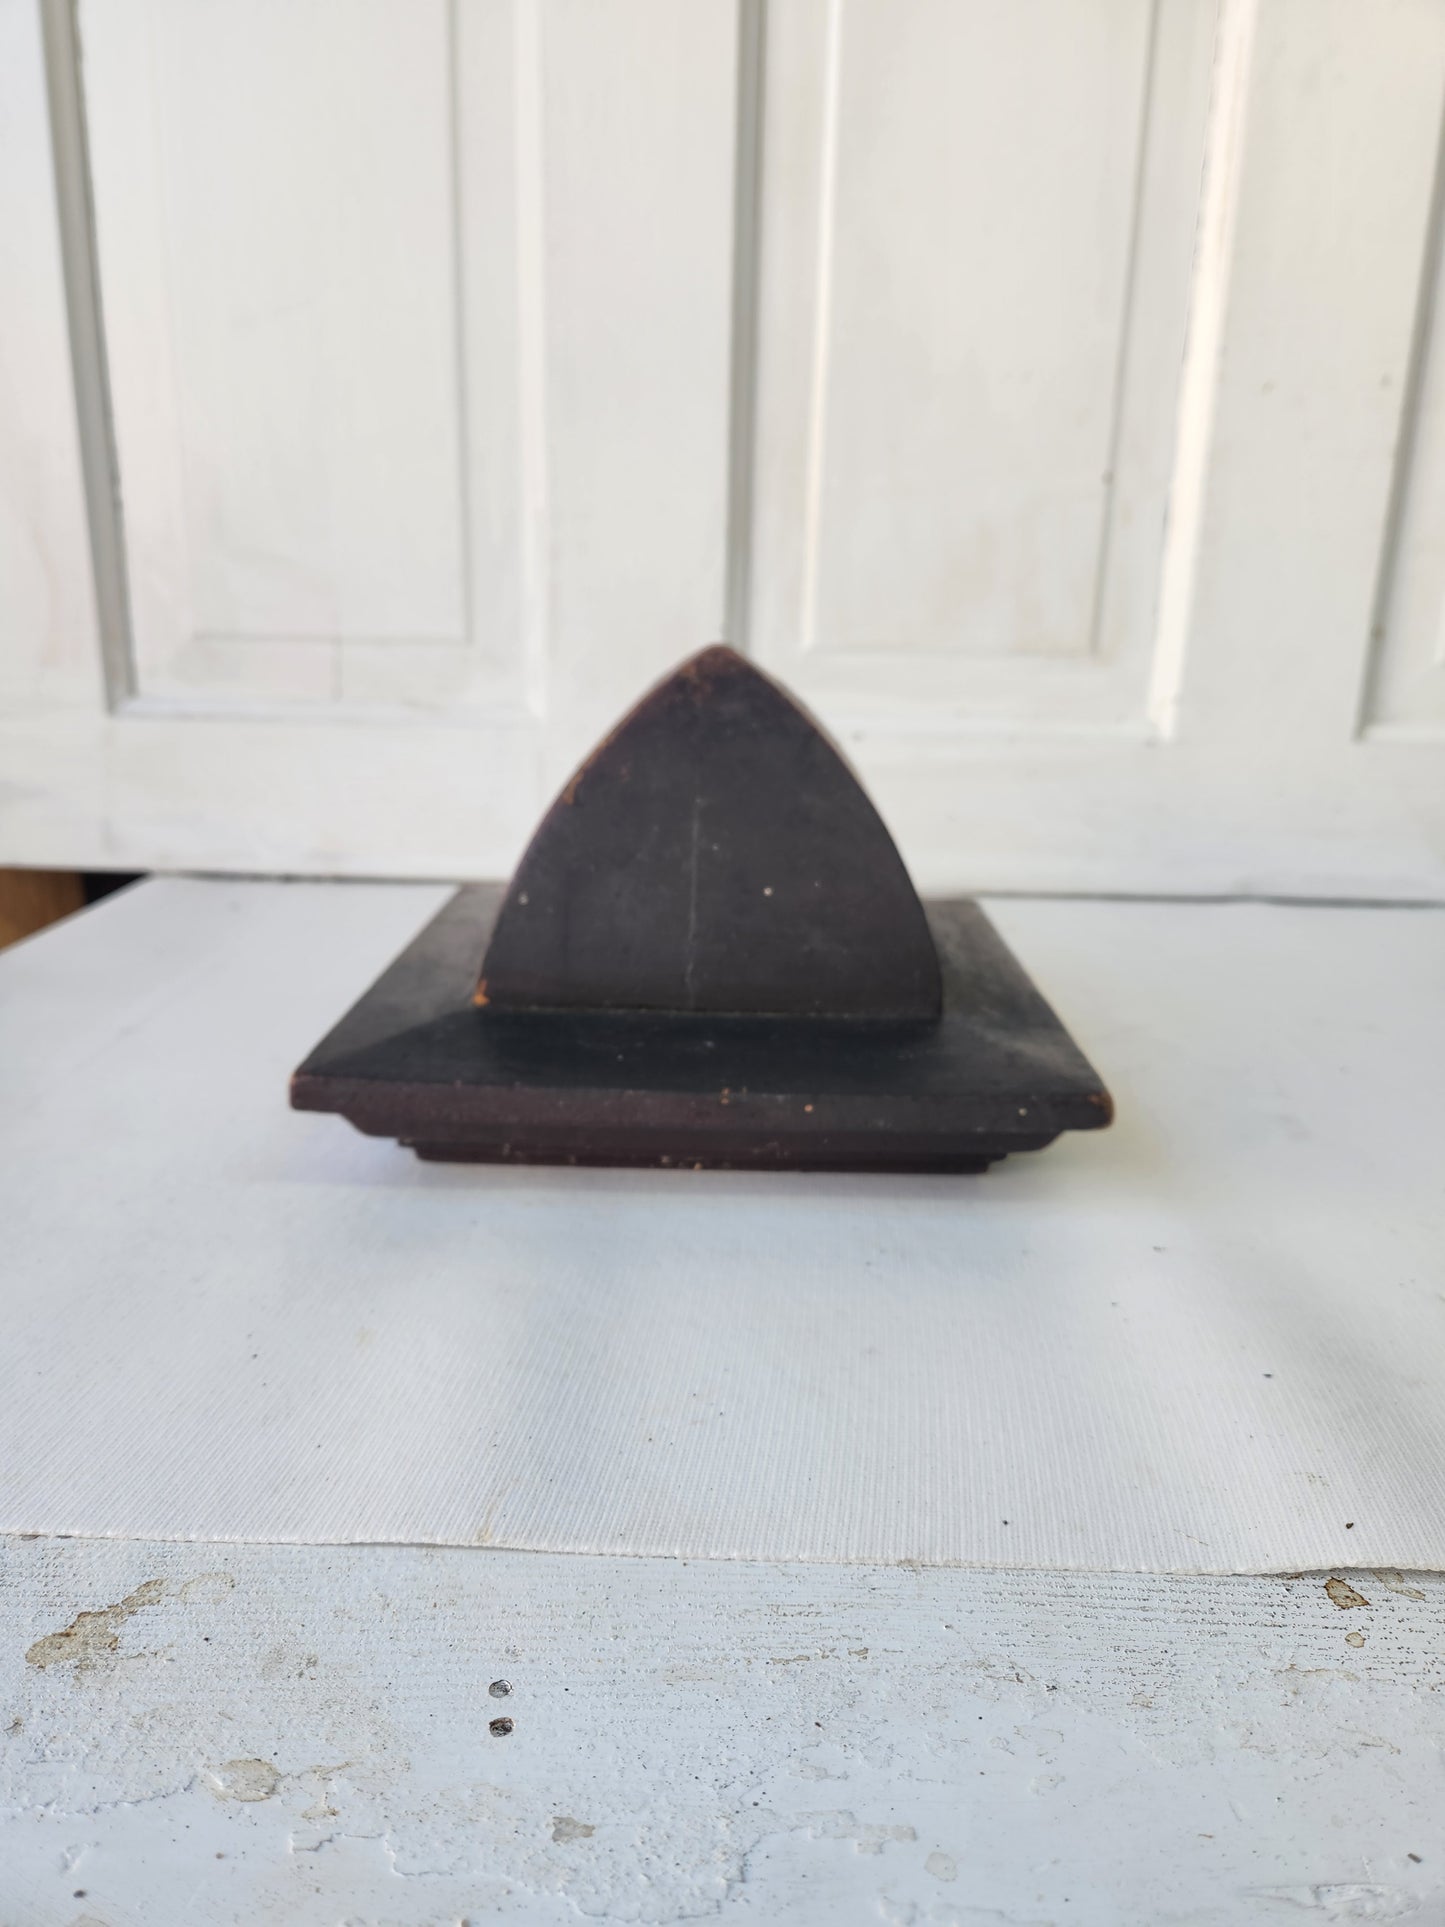 Large Antique Pyramid Wood Newel Post Topper, Wood Newel Post Finial Top #112501